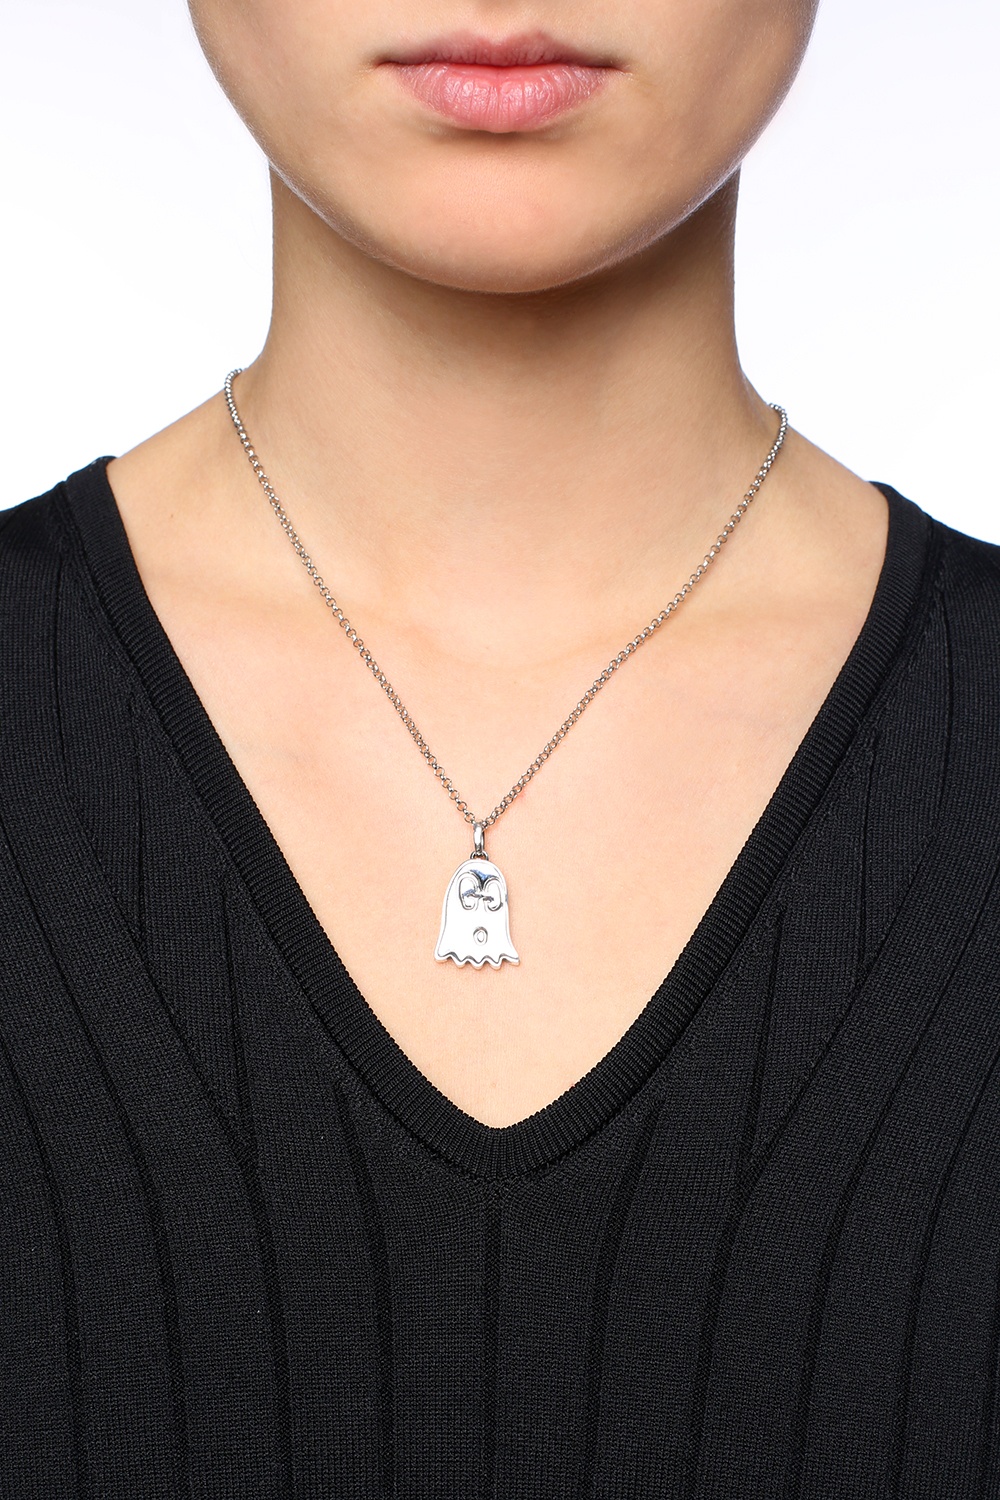 gucci ghost mens necklace